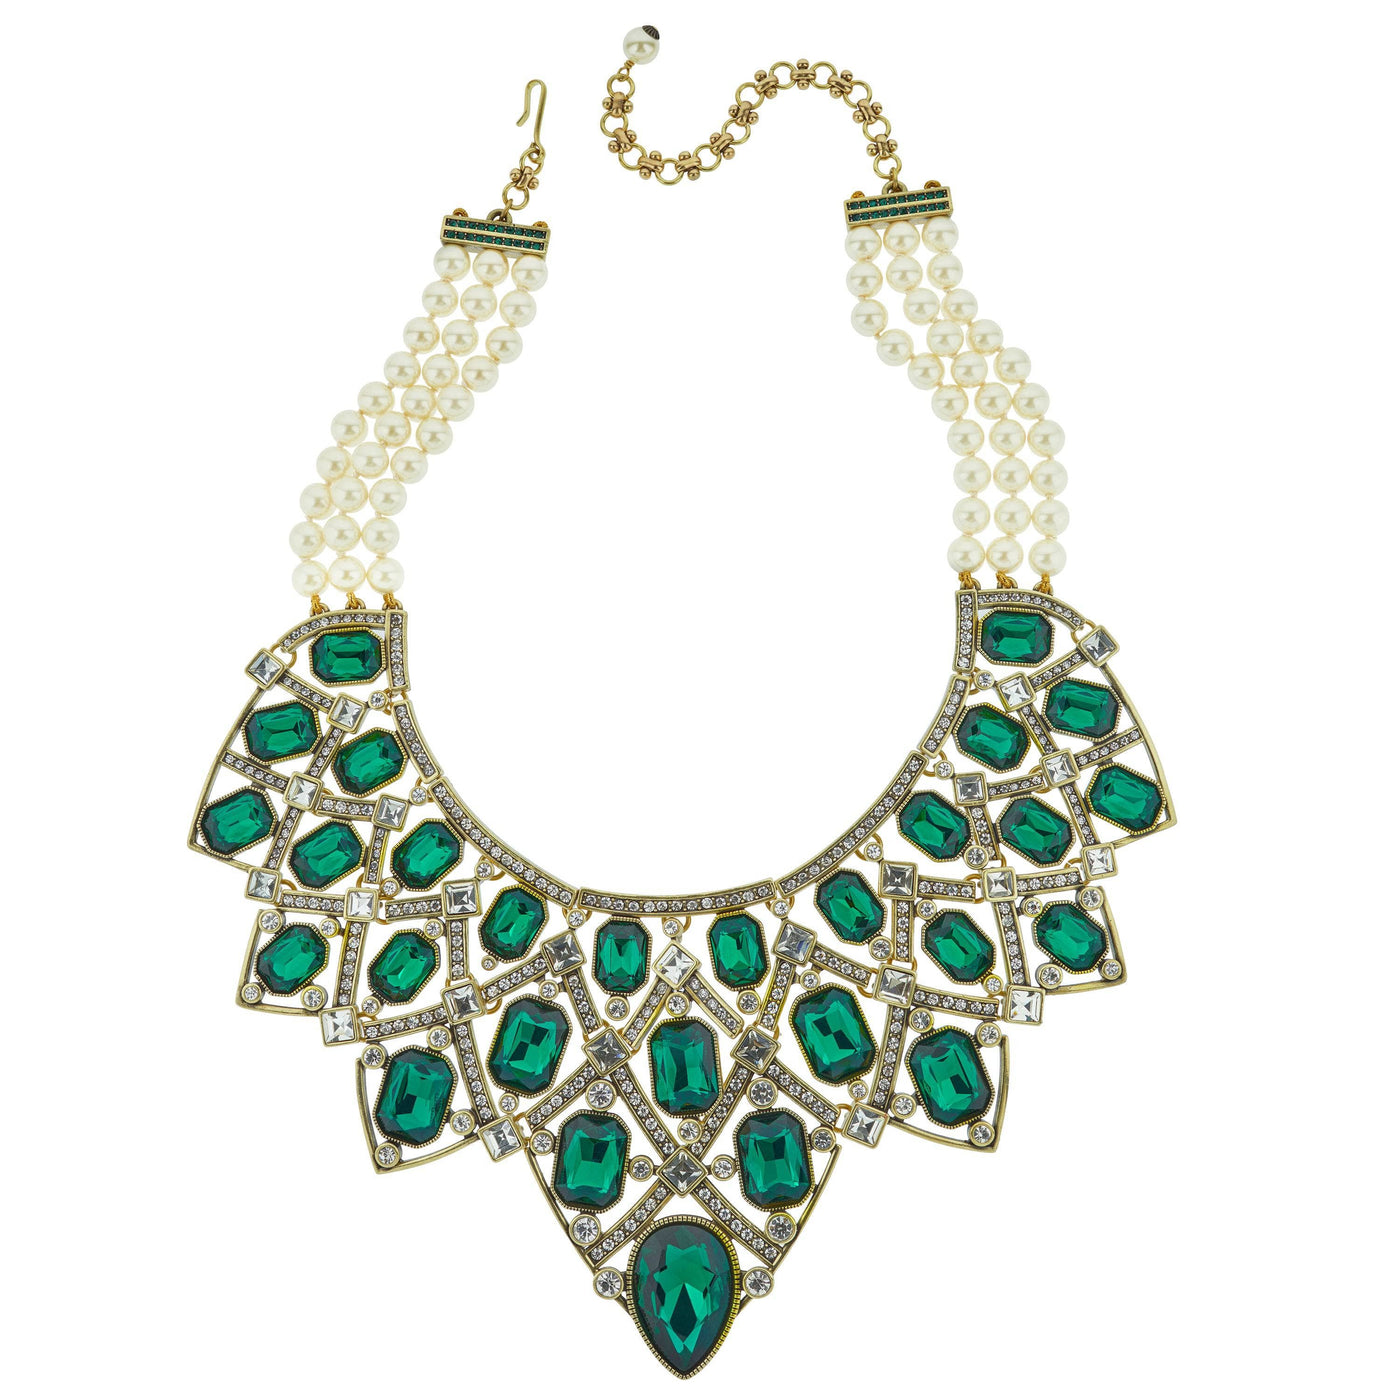 HEIDI DAUS®"Many Shades of Fabulous" Beaded Crystal Statement Necklace